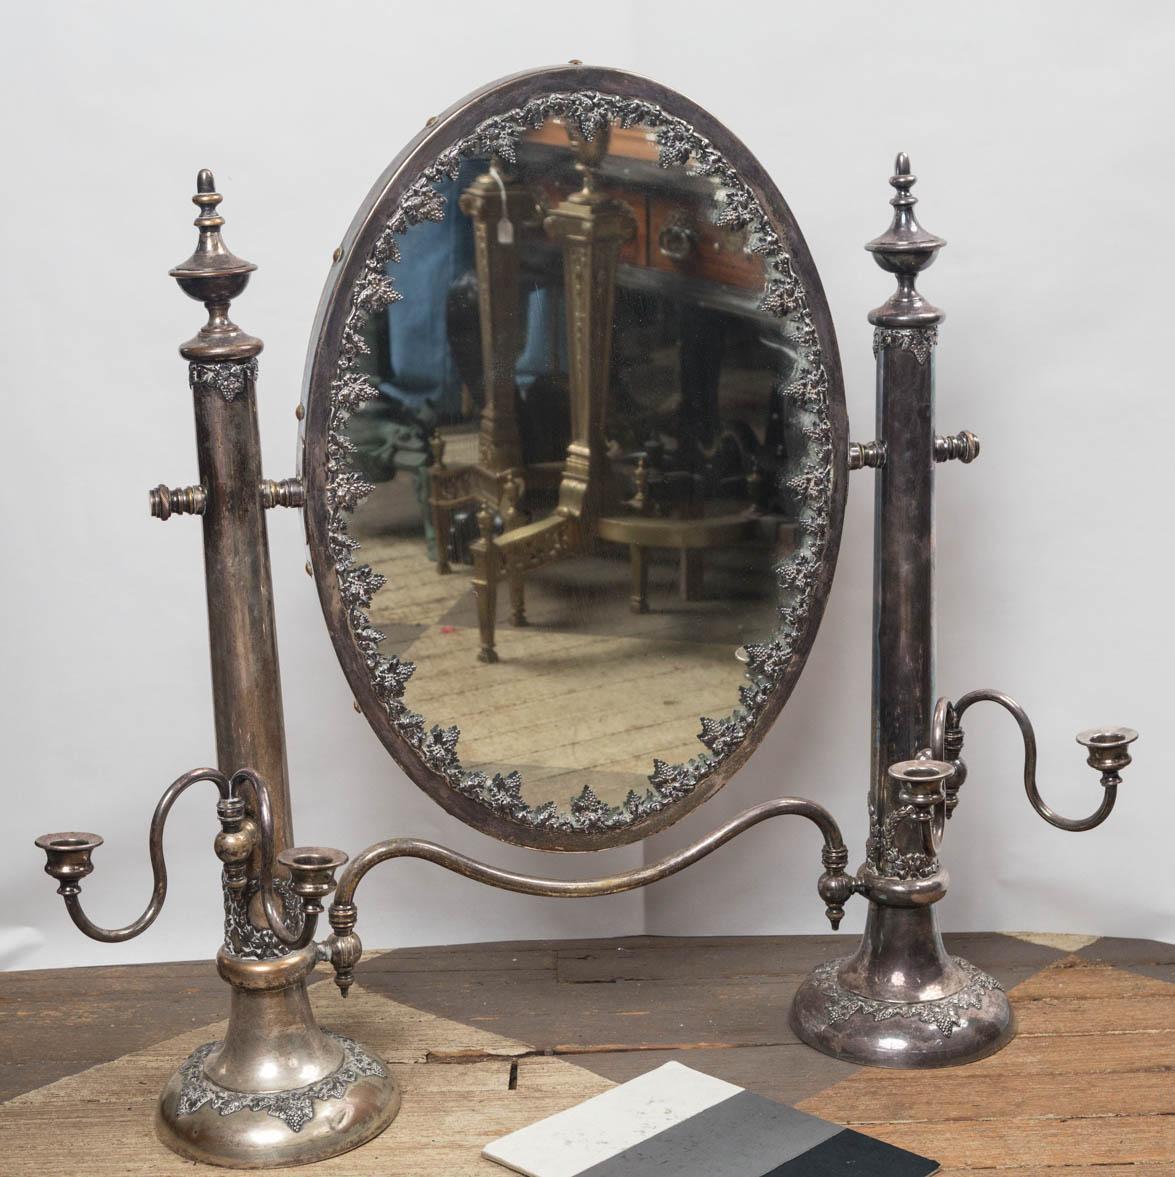 The mirror has a wooden back. The glass pivots up and down. The glass is framed with grape leaves and grapes. Two round columns attached left and right. The have urn form finials and are decorated with grape leaves and grapes. Double candle arms,